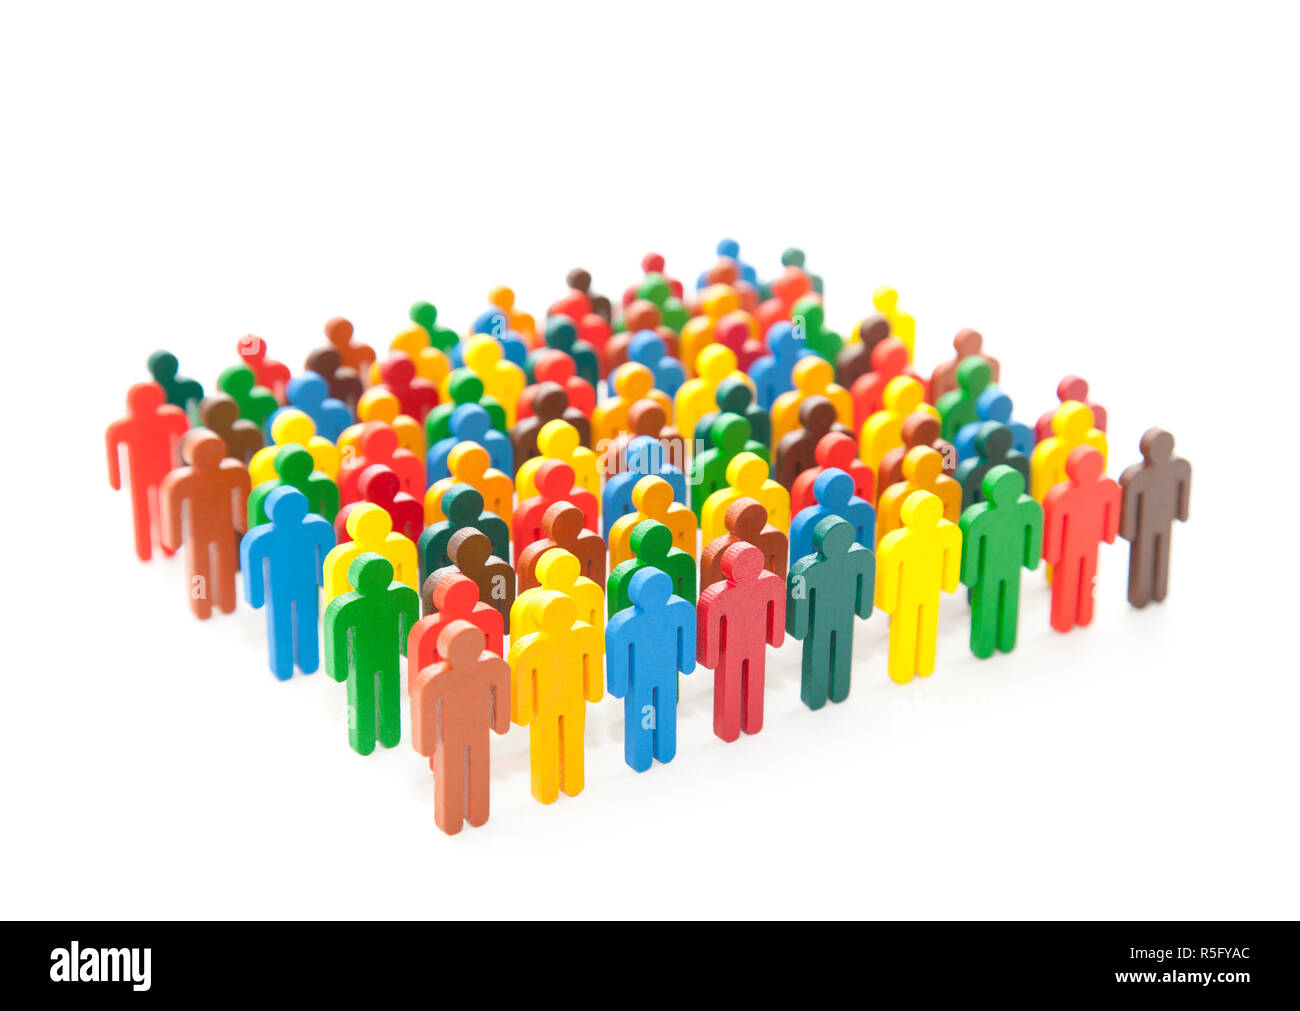 Colorful painted group of people figures on white background Stock Photo